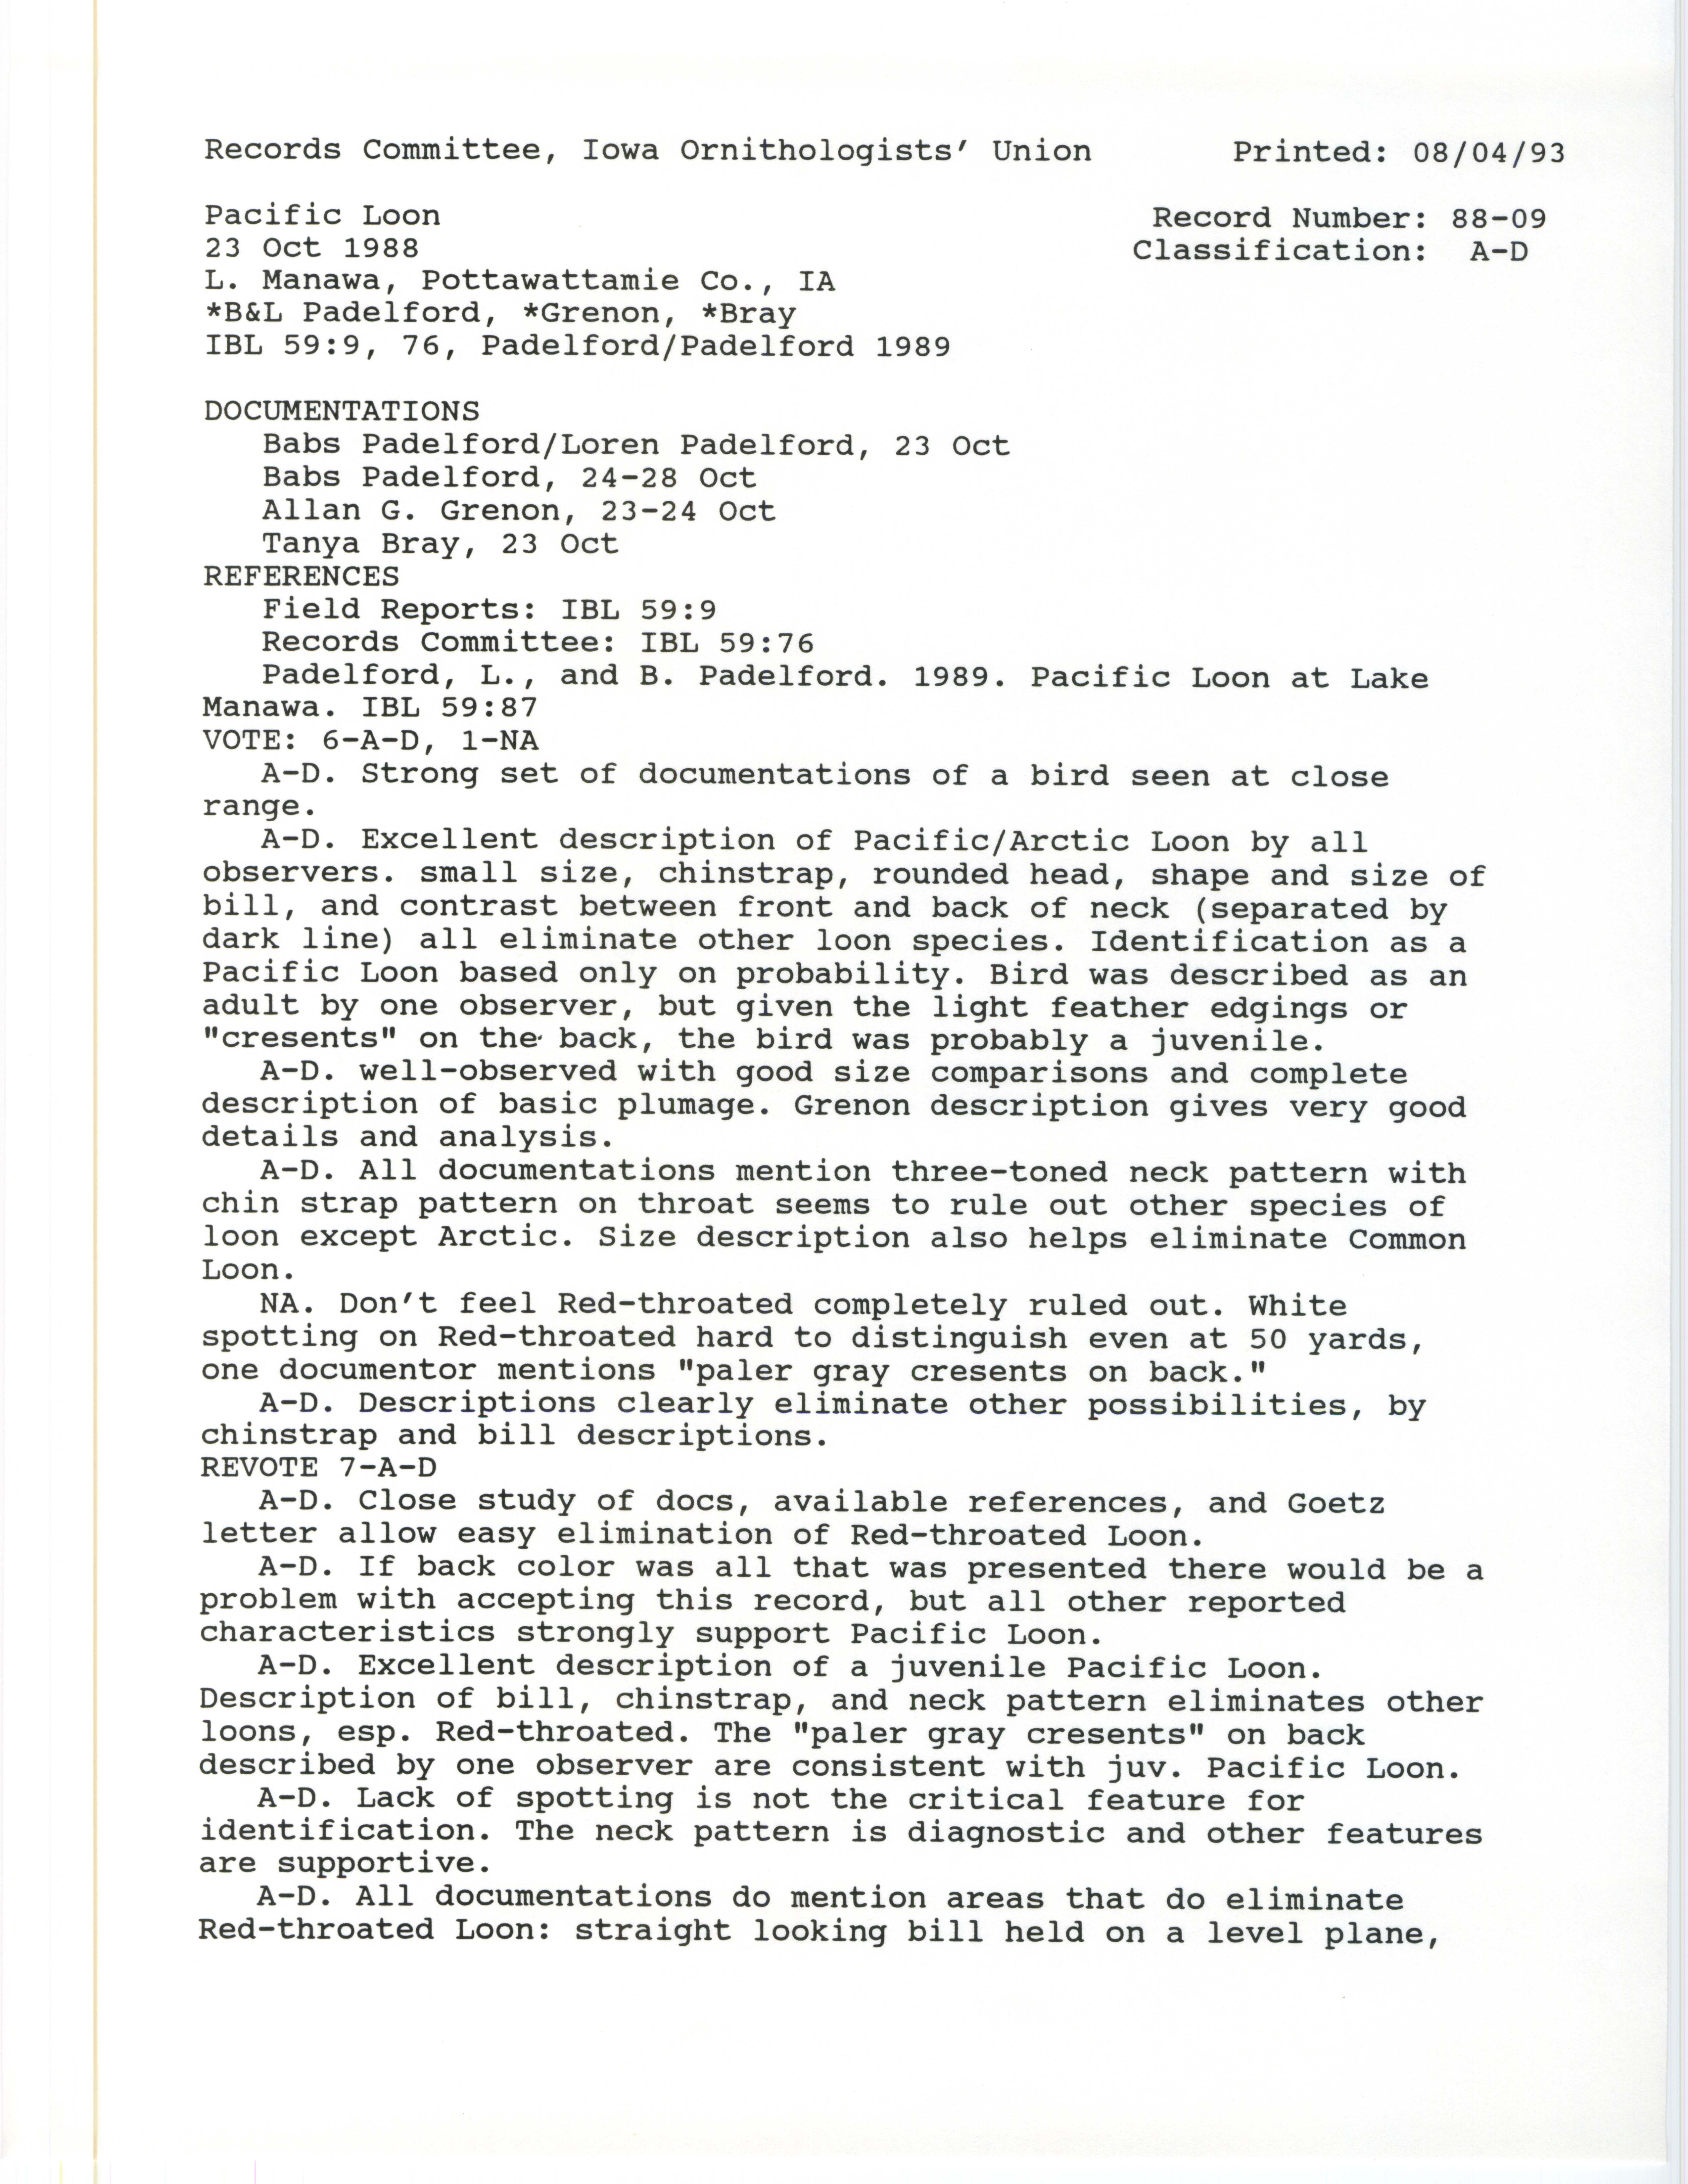 Records Committee review for rare bird sighting of Pacific Loon at Lake Manawa, 1988